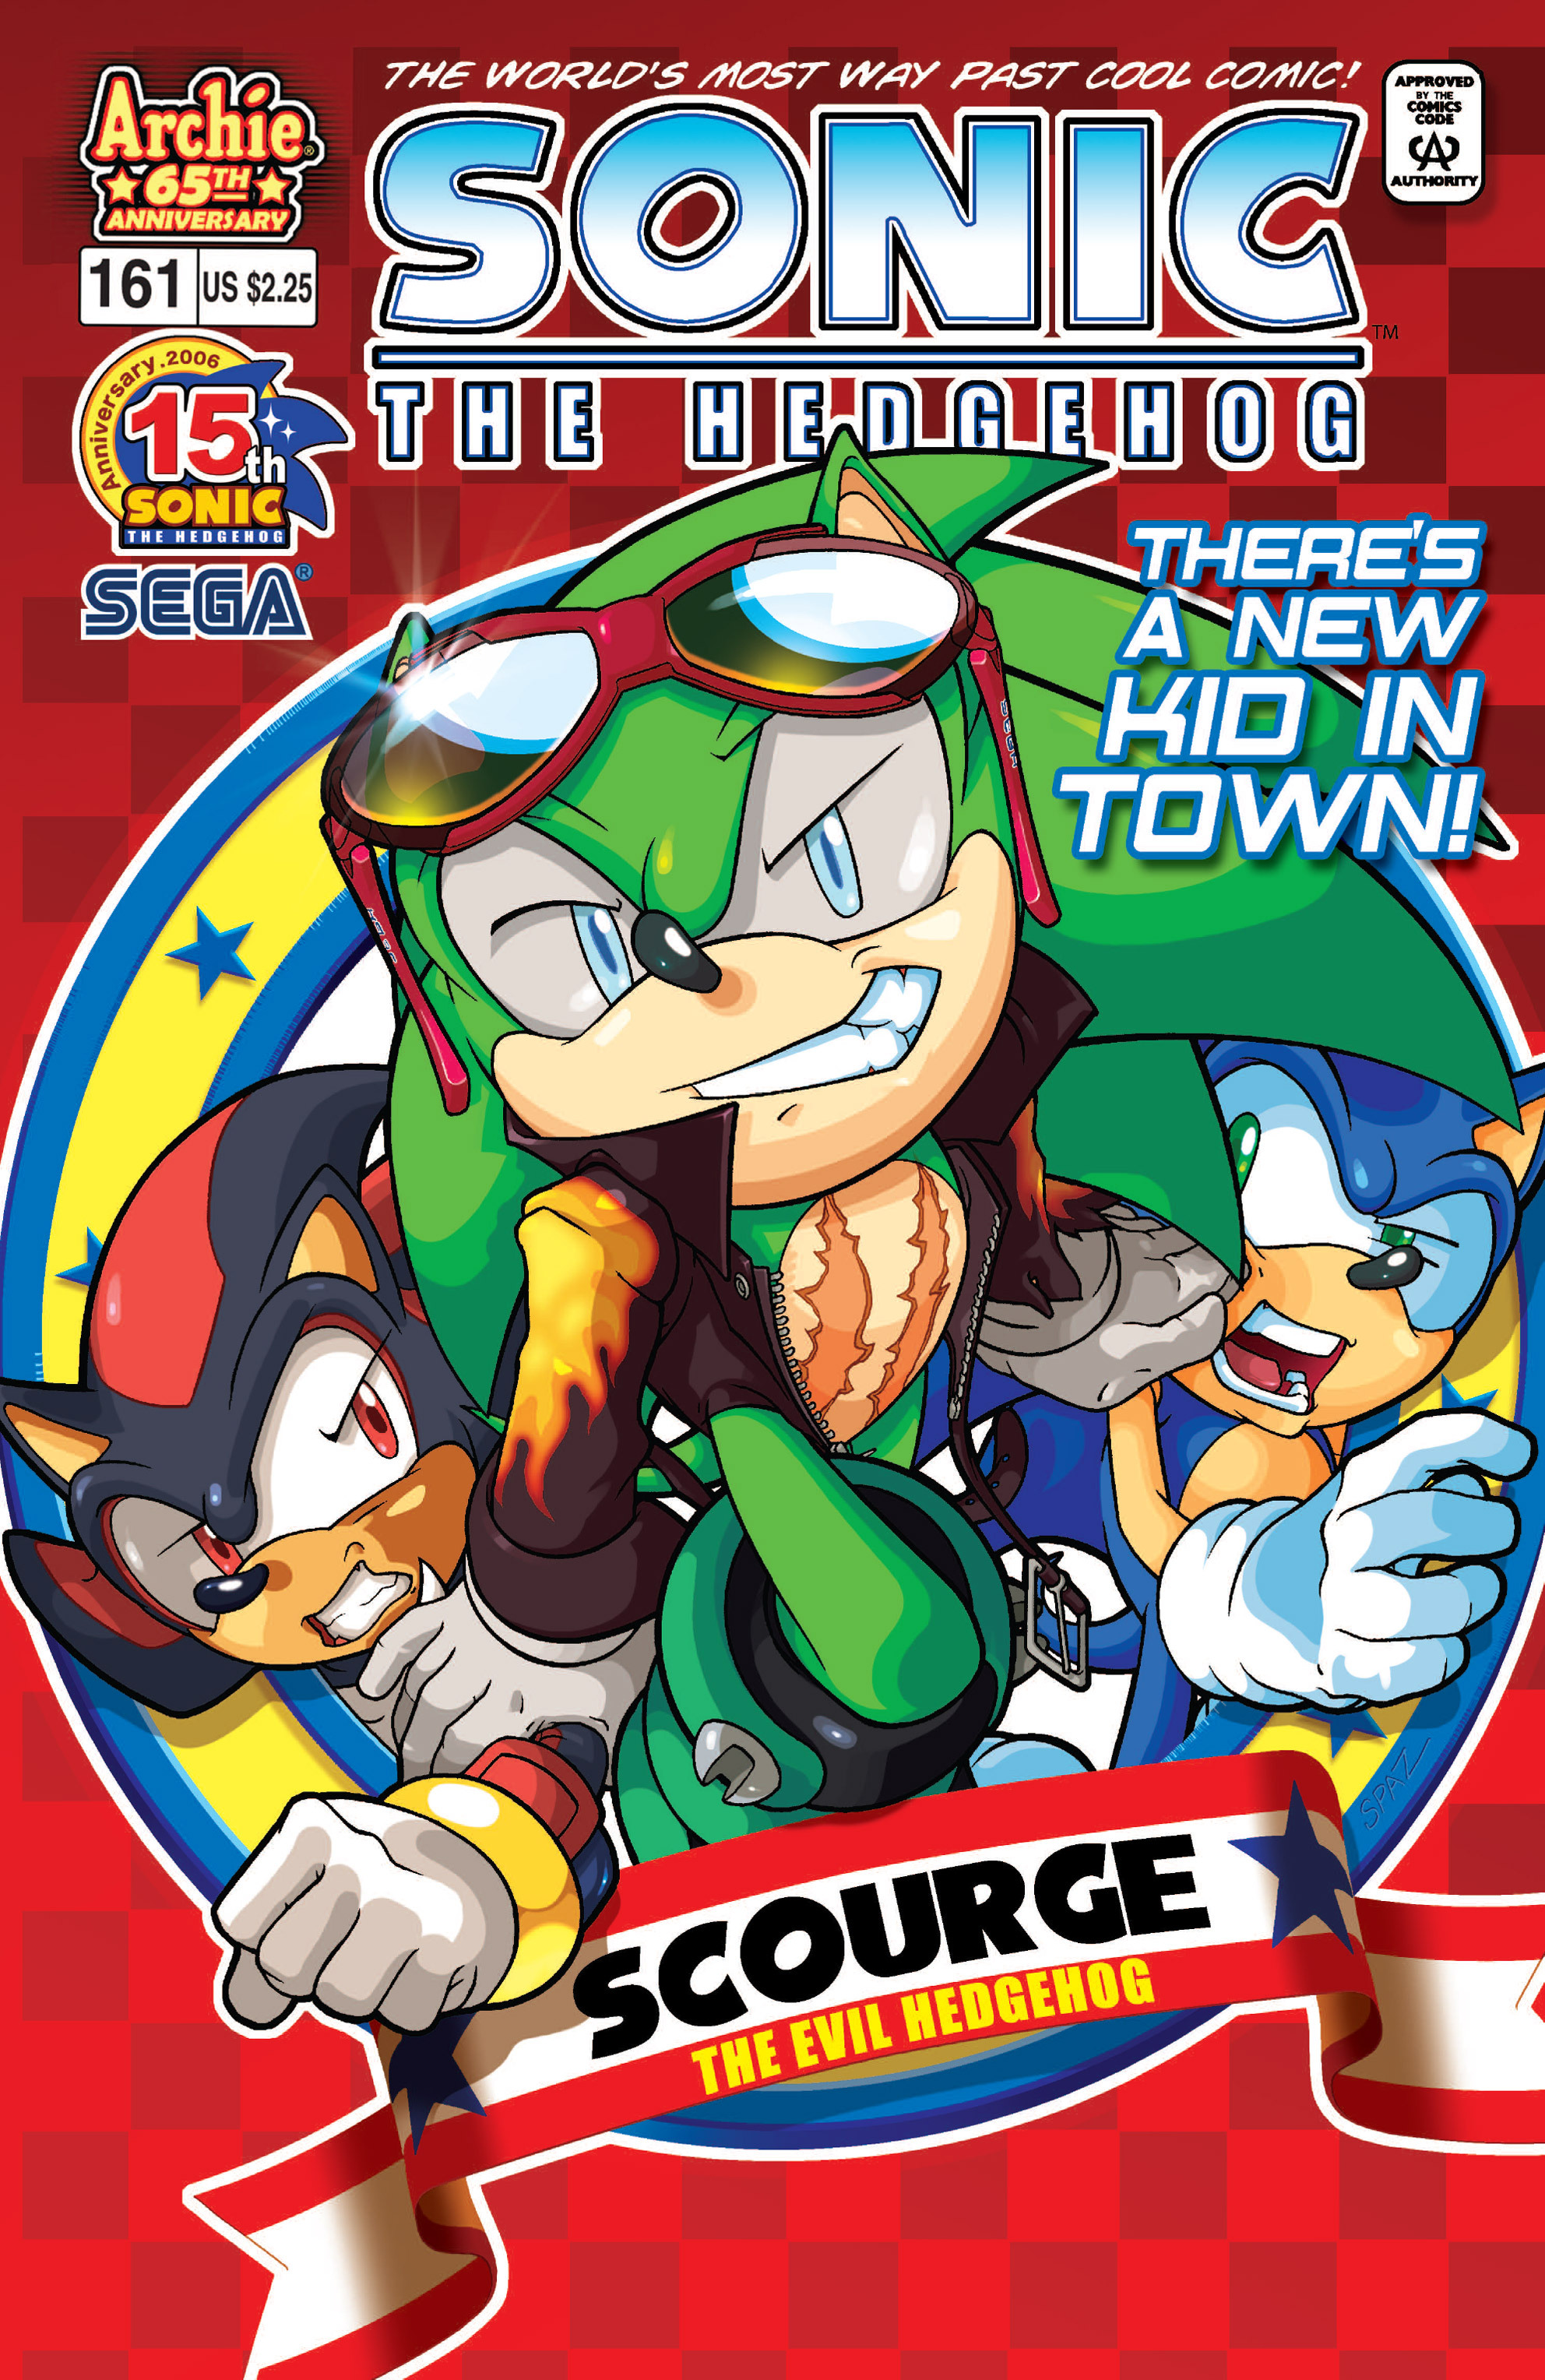 Archie Sonic the Hedgehog Issue 161 - Sonic News Network, the ...